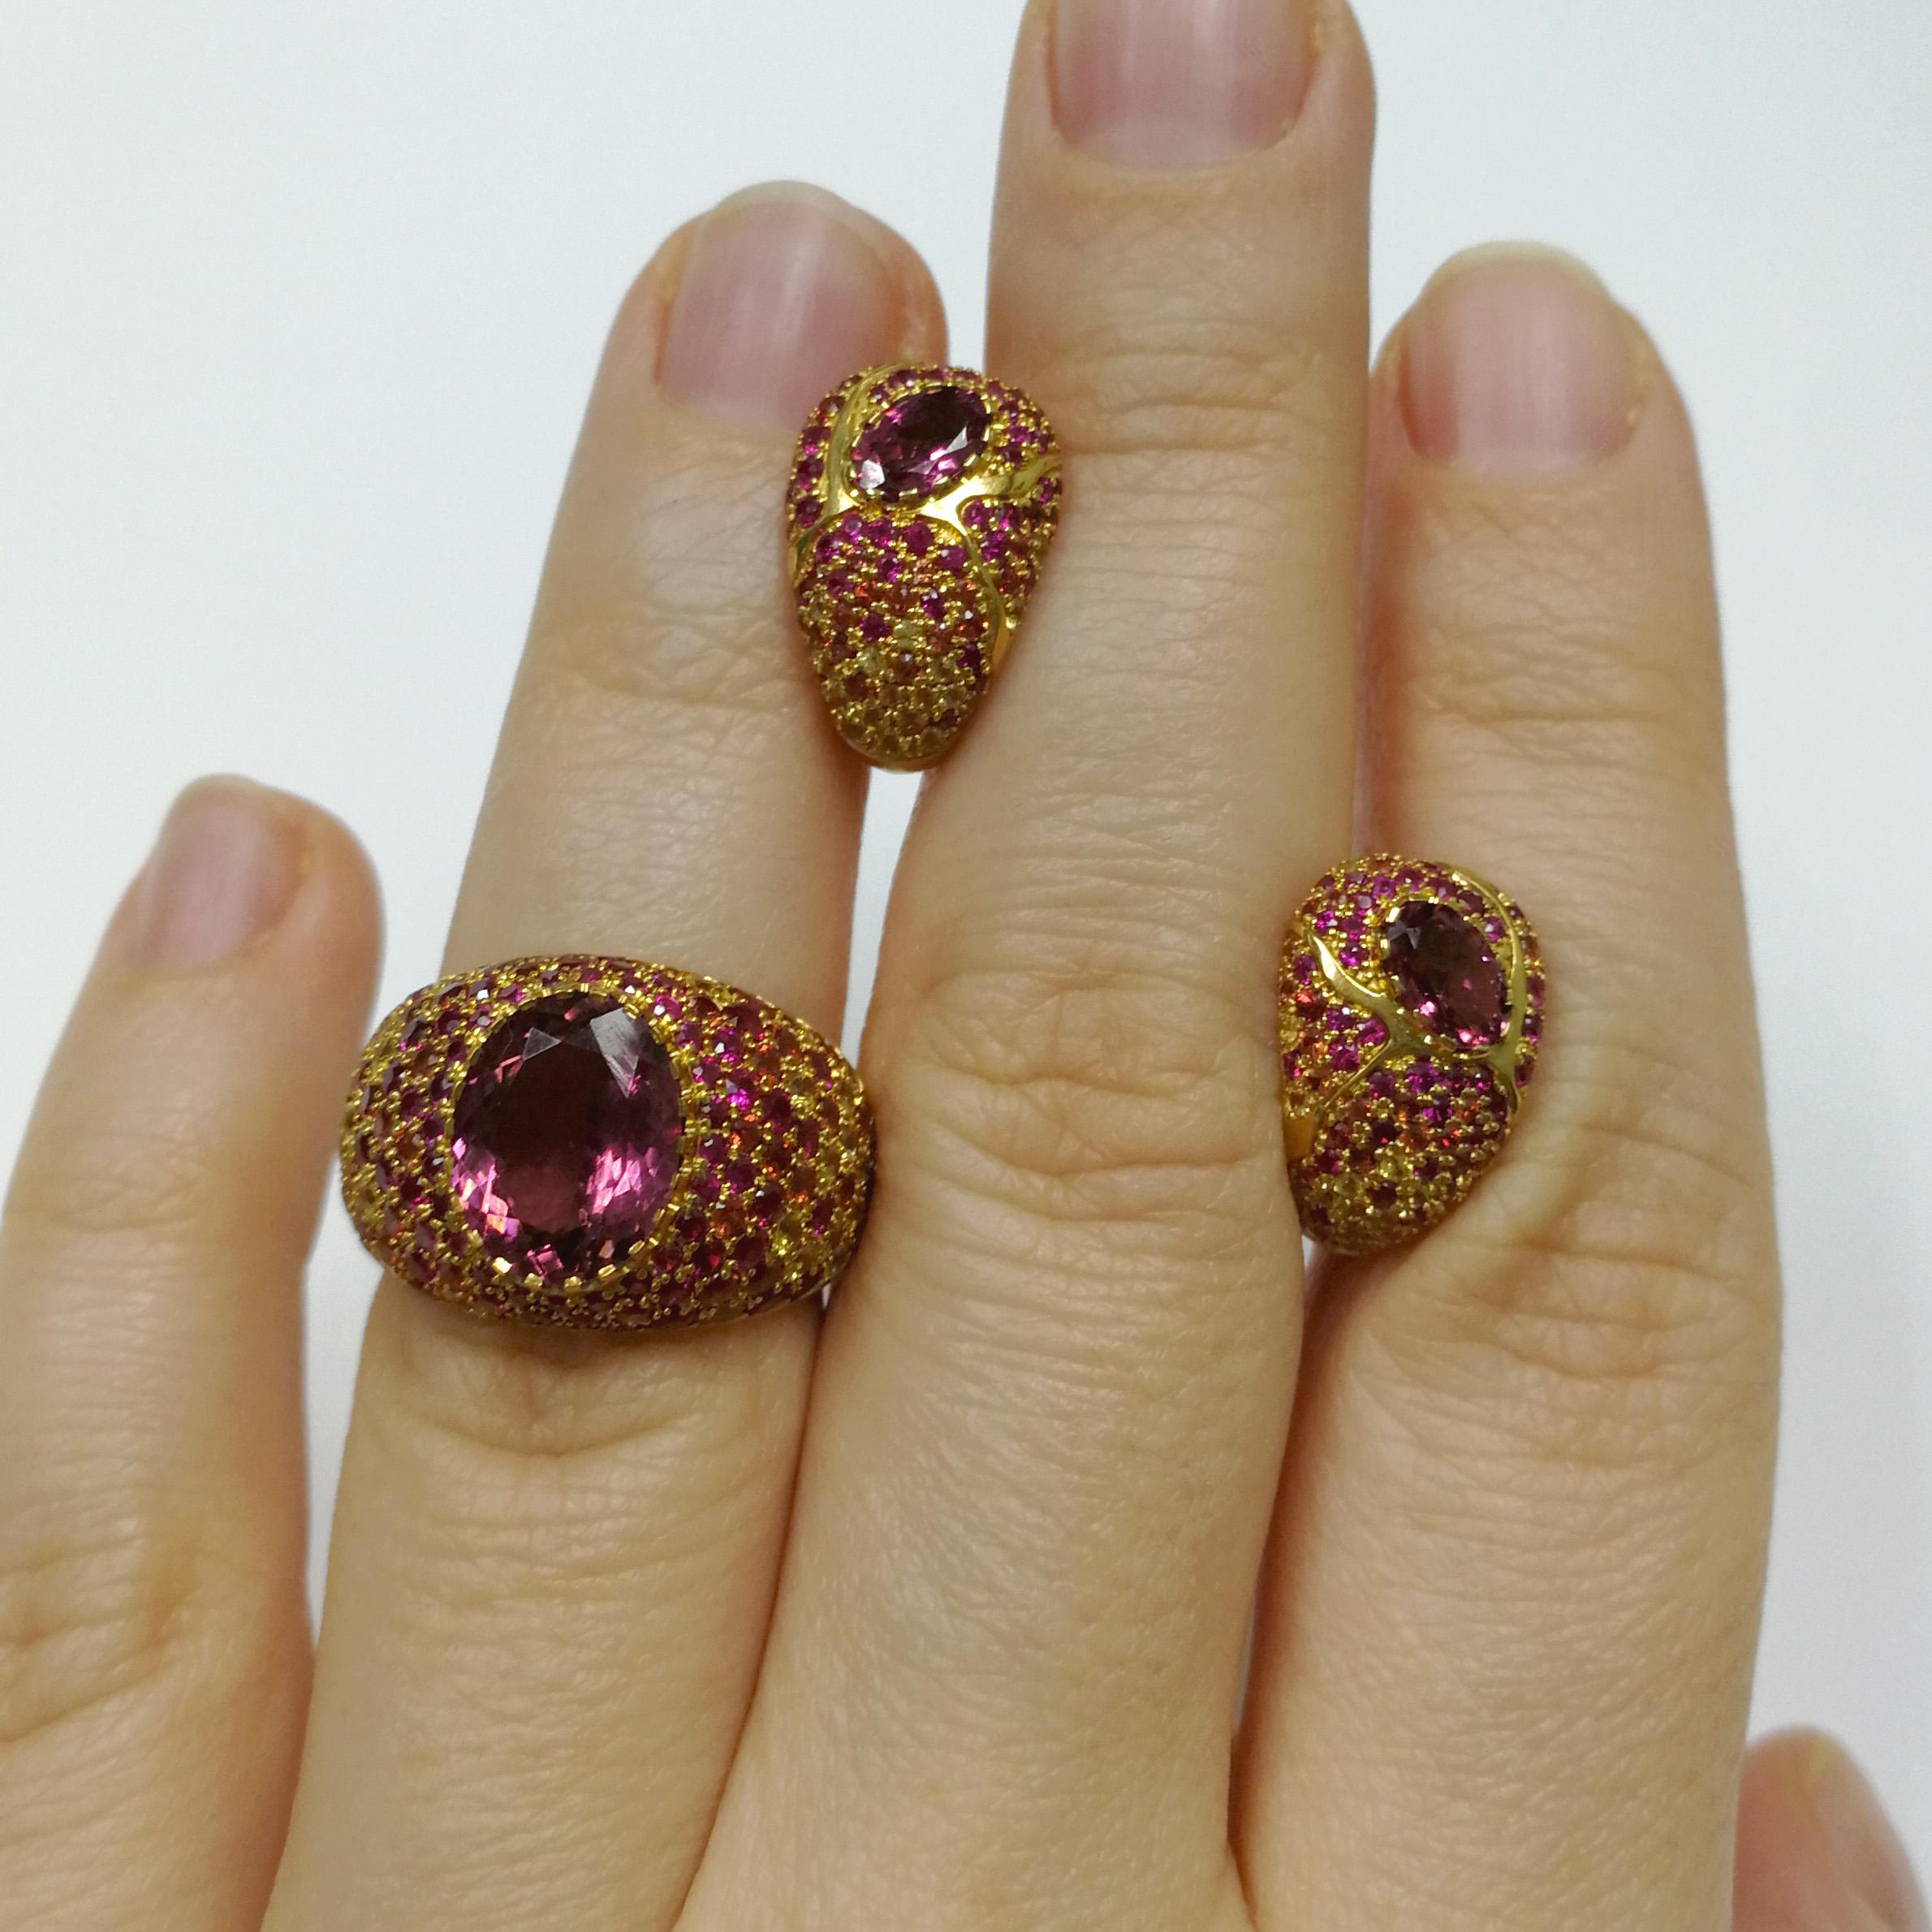 Pink Tourmalines Sapphires Rubies Yellow 18 Karat Gold Riviera Suite
The name and the variety of colours in this collection are associated with the bright Italian and French Riviera, vivid and colourful houses and sun reflections on the water. A